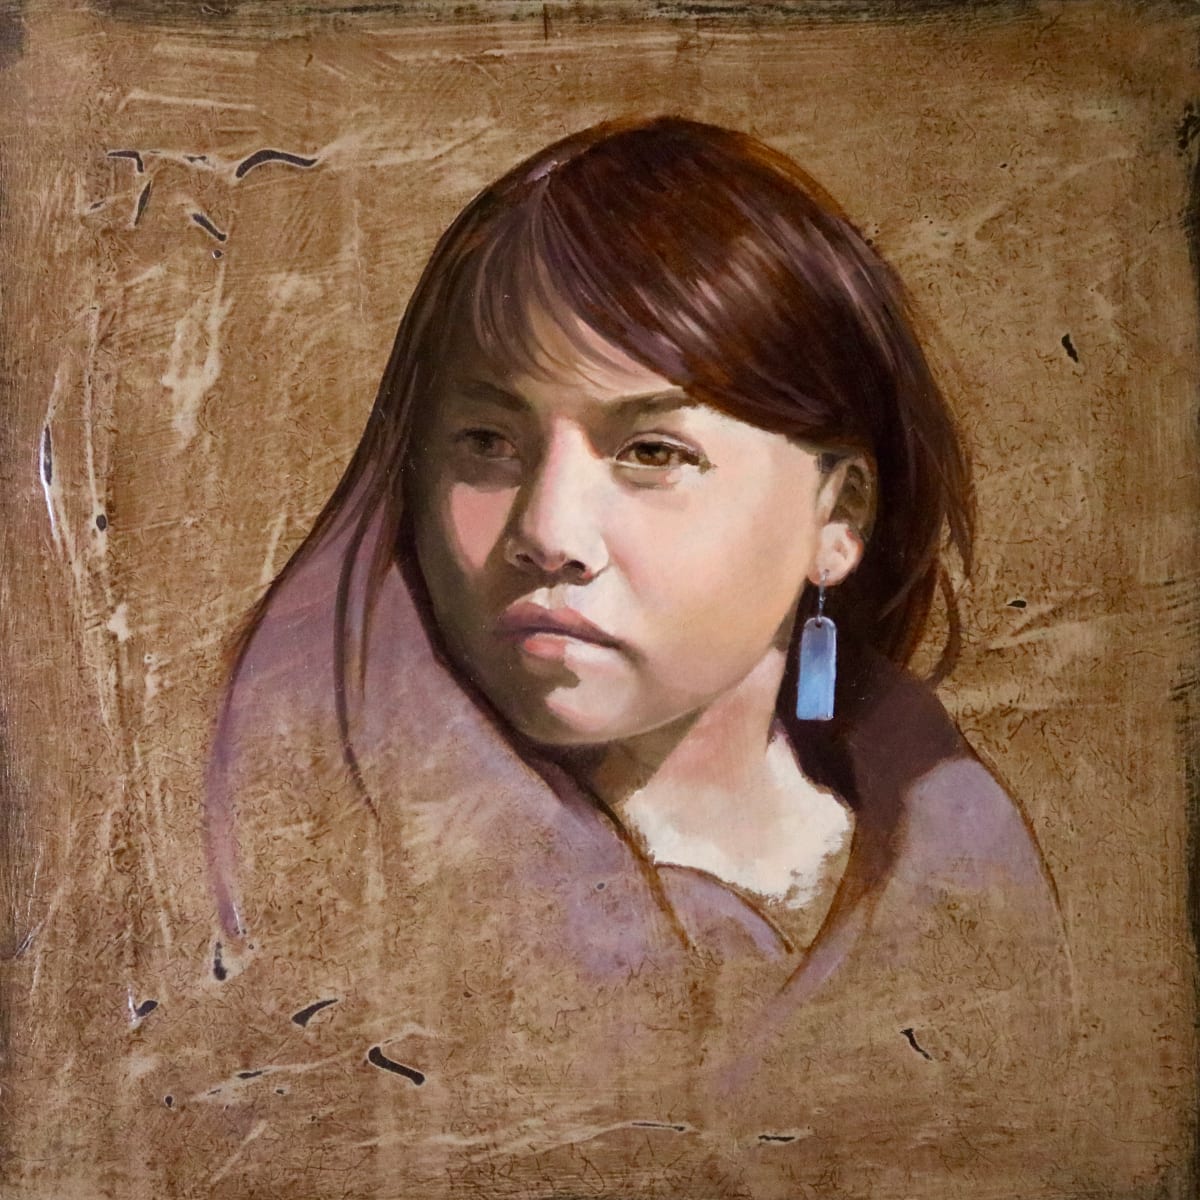 Looking to the Future by Karen Clarkson  Image: Portrait of young Navajo girl